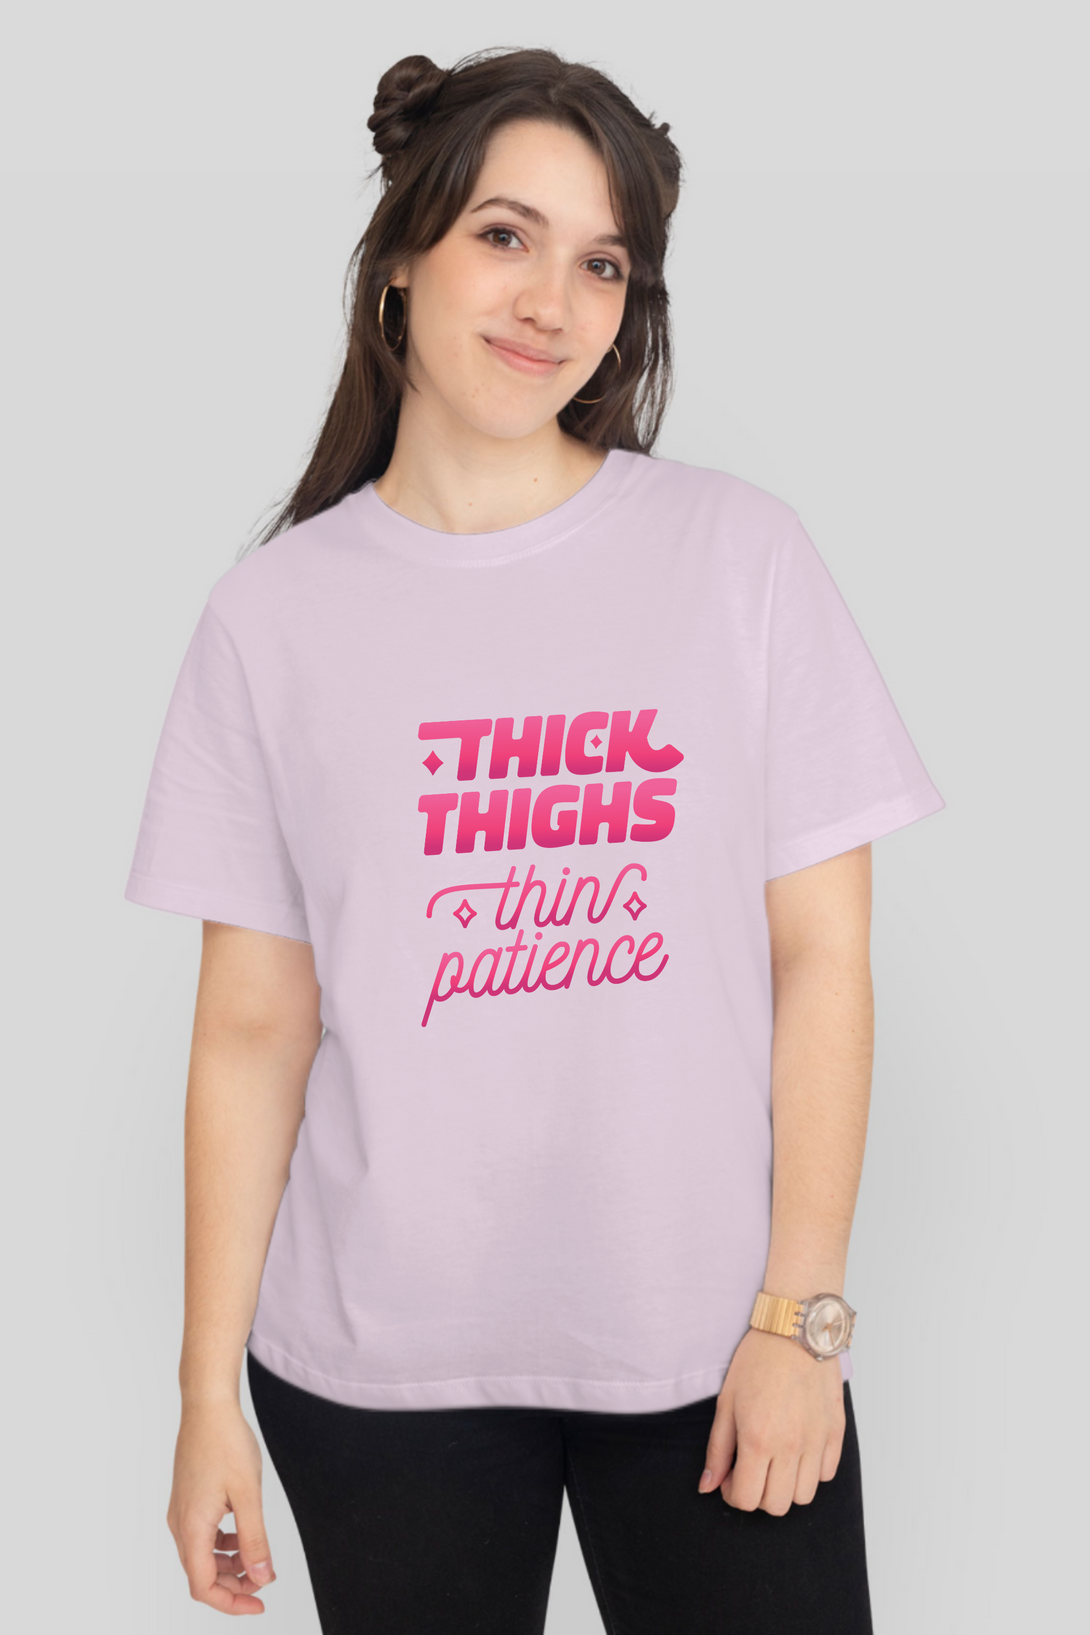 Thick Things Thin Patience Printed T-Shirt For Women - WowWaves - 6